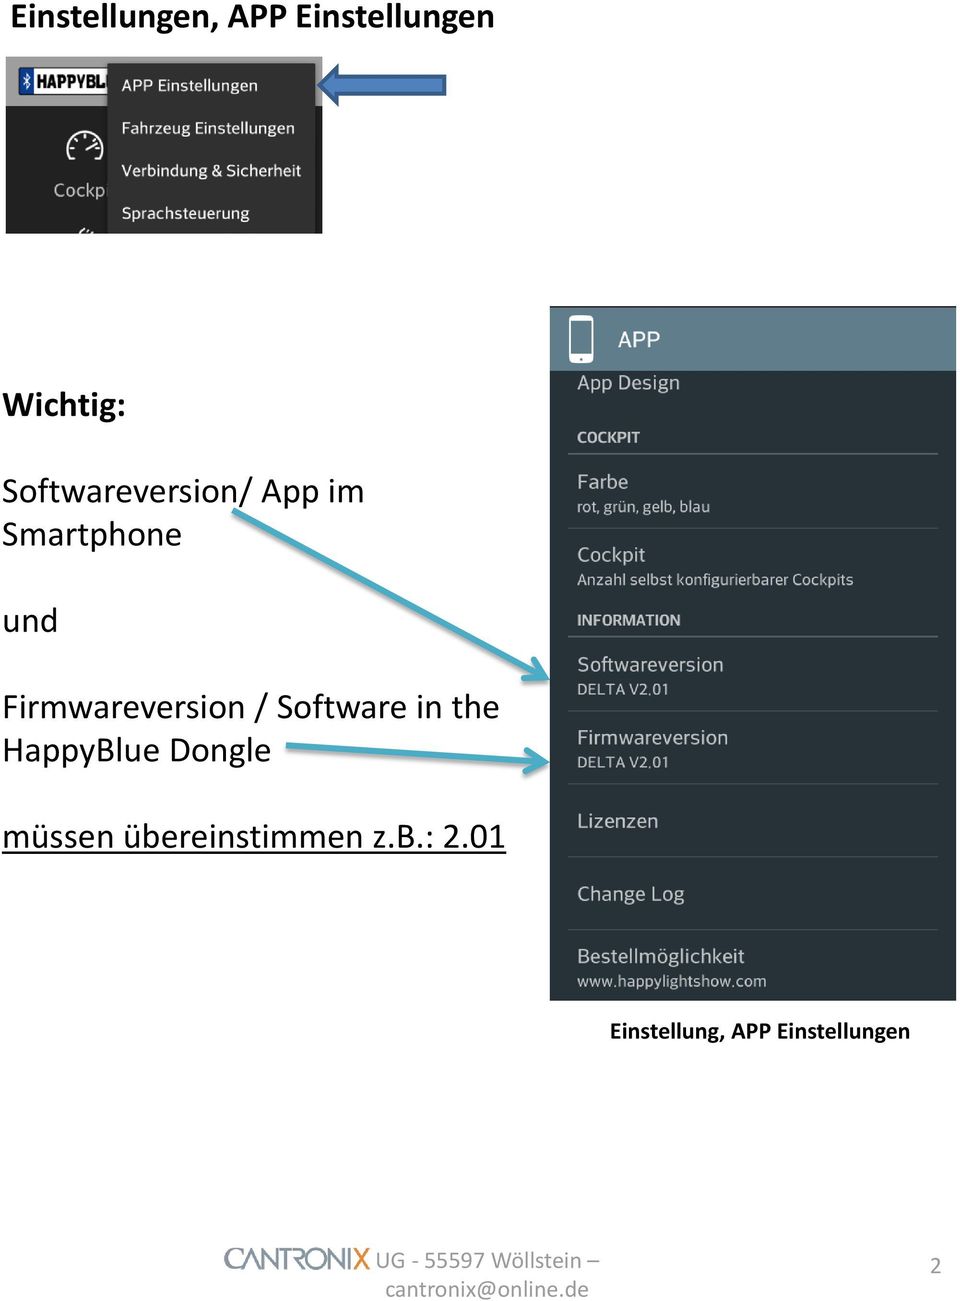 Firmwareversion / Software in the HappyBlue